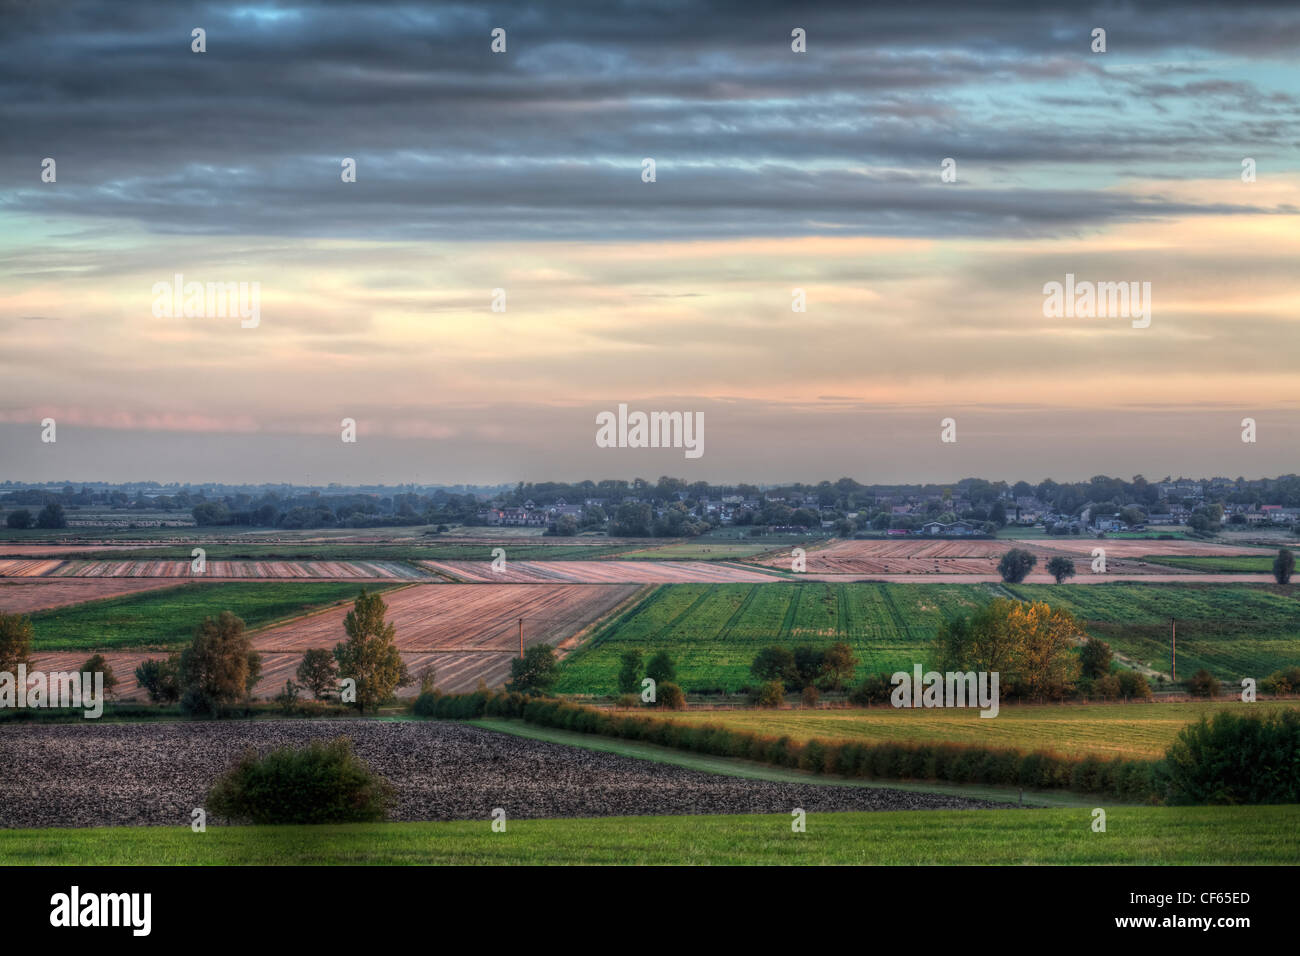 A view over the flat rural countryside in Cambridgeshire. Stock Photo